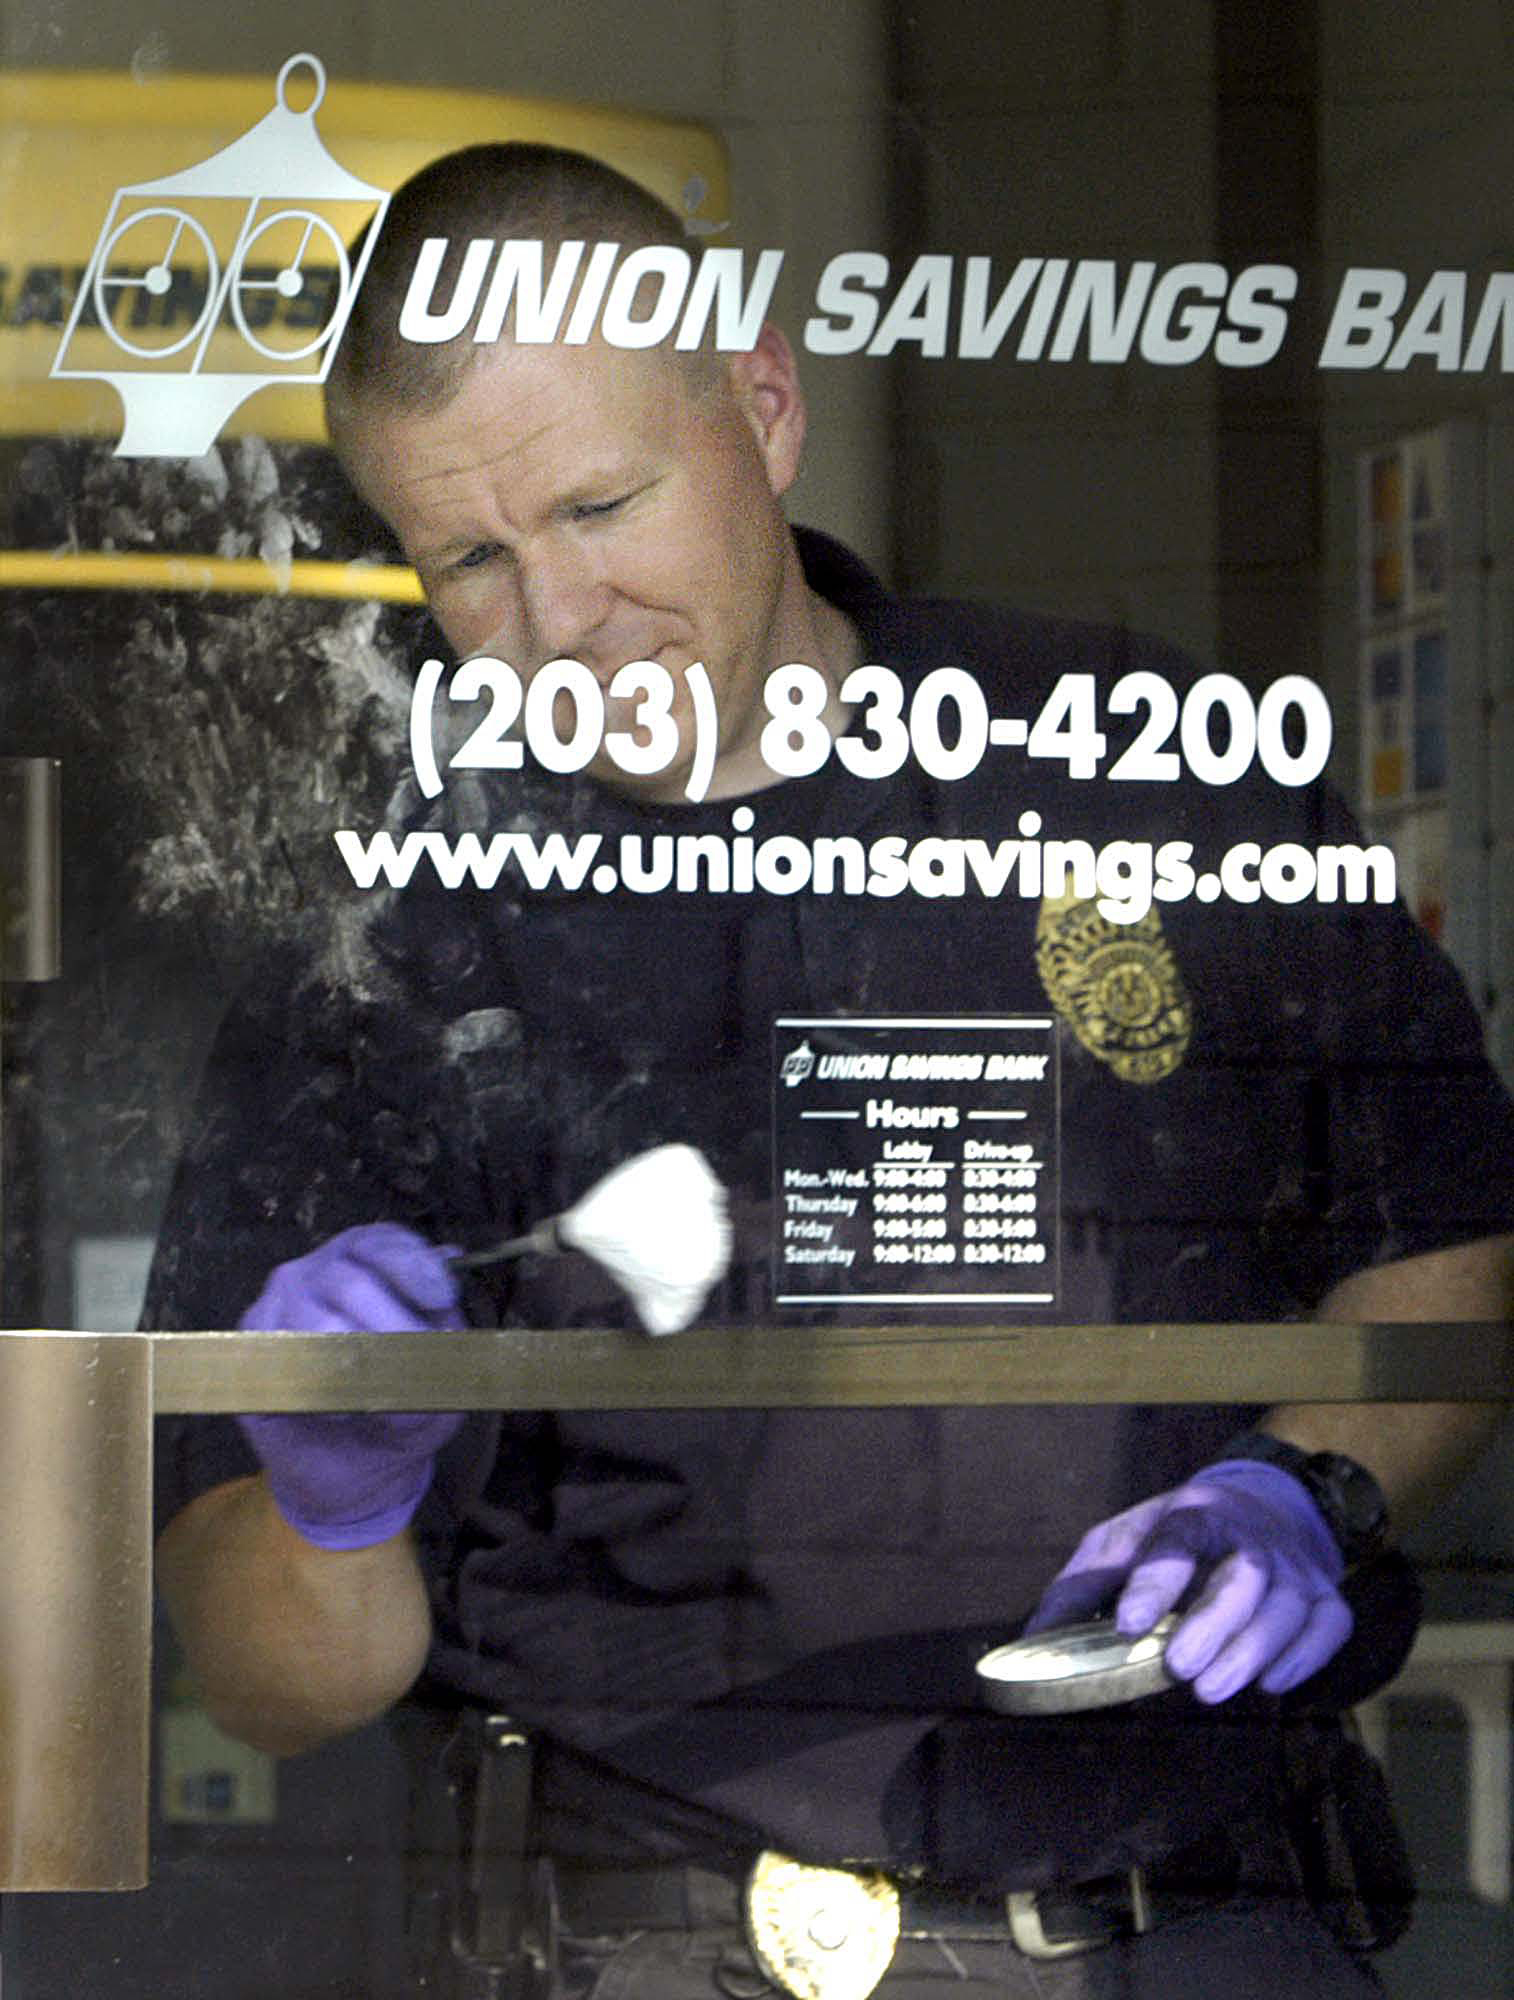 Danbury Police Sgt Bryan Bishop dusts for fingerprints on the front door of Union Savings Bank on Newtown Rd in Danbury after a bank robbery.